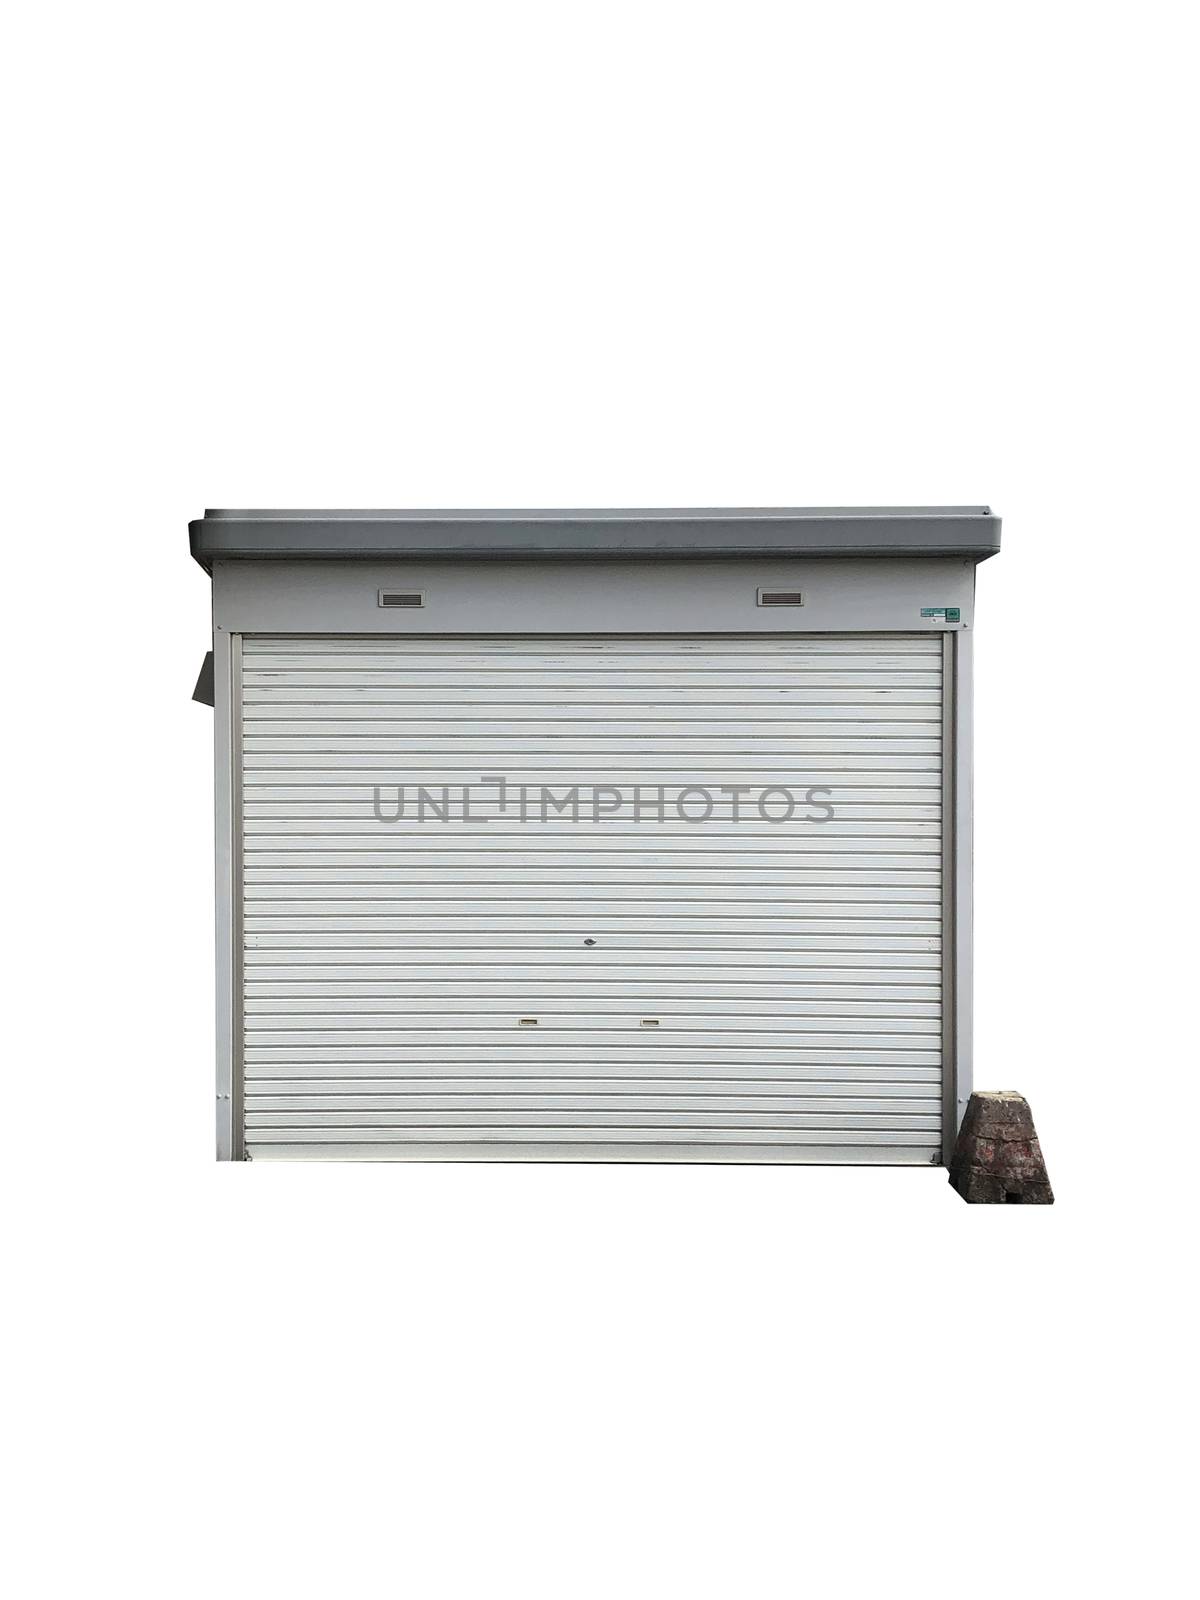 Front view of garage on white background